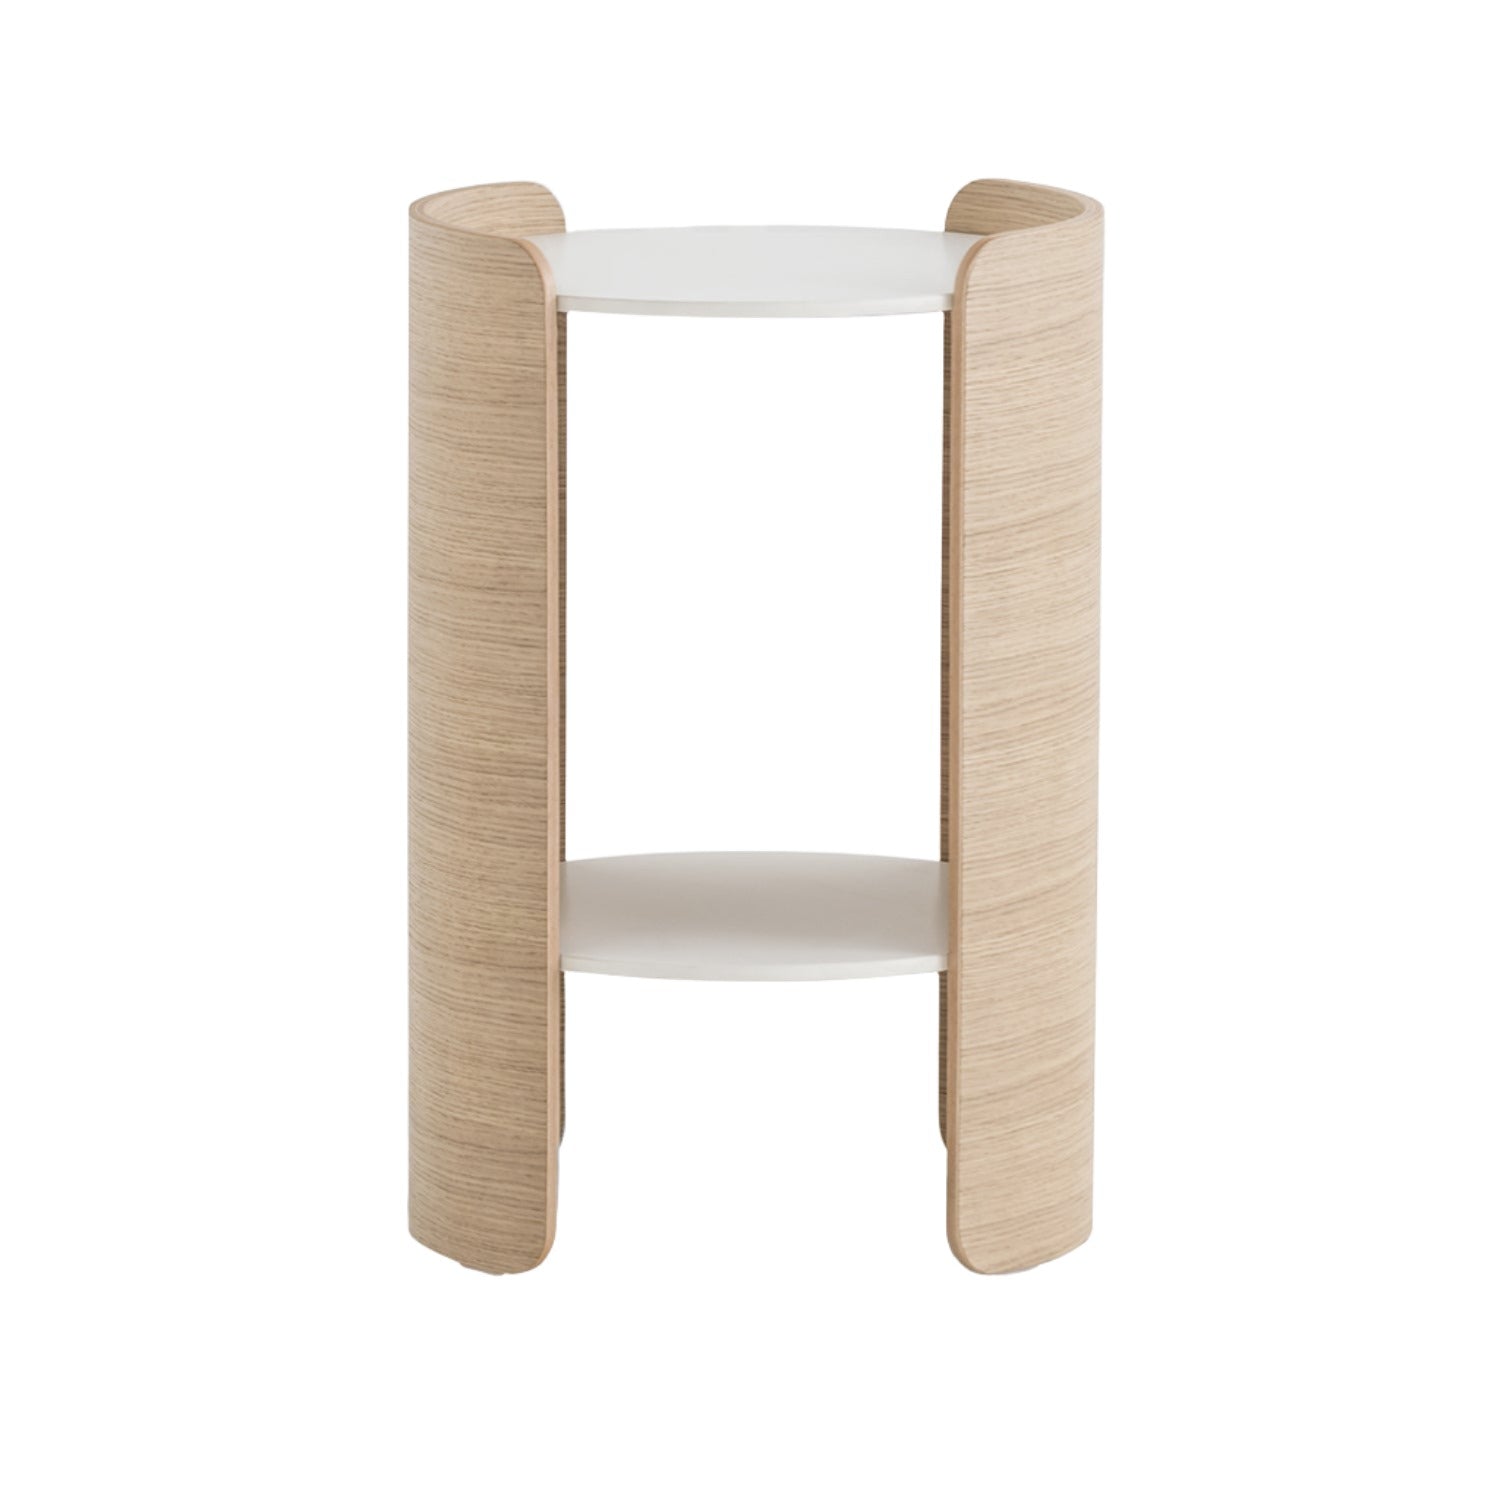 Pedrali Parenthesis side table in oak frame and white laminate top